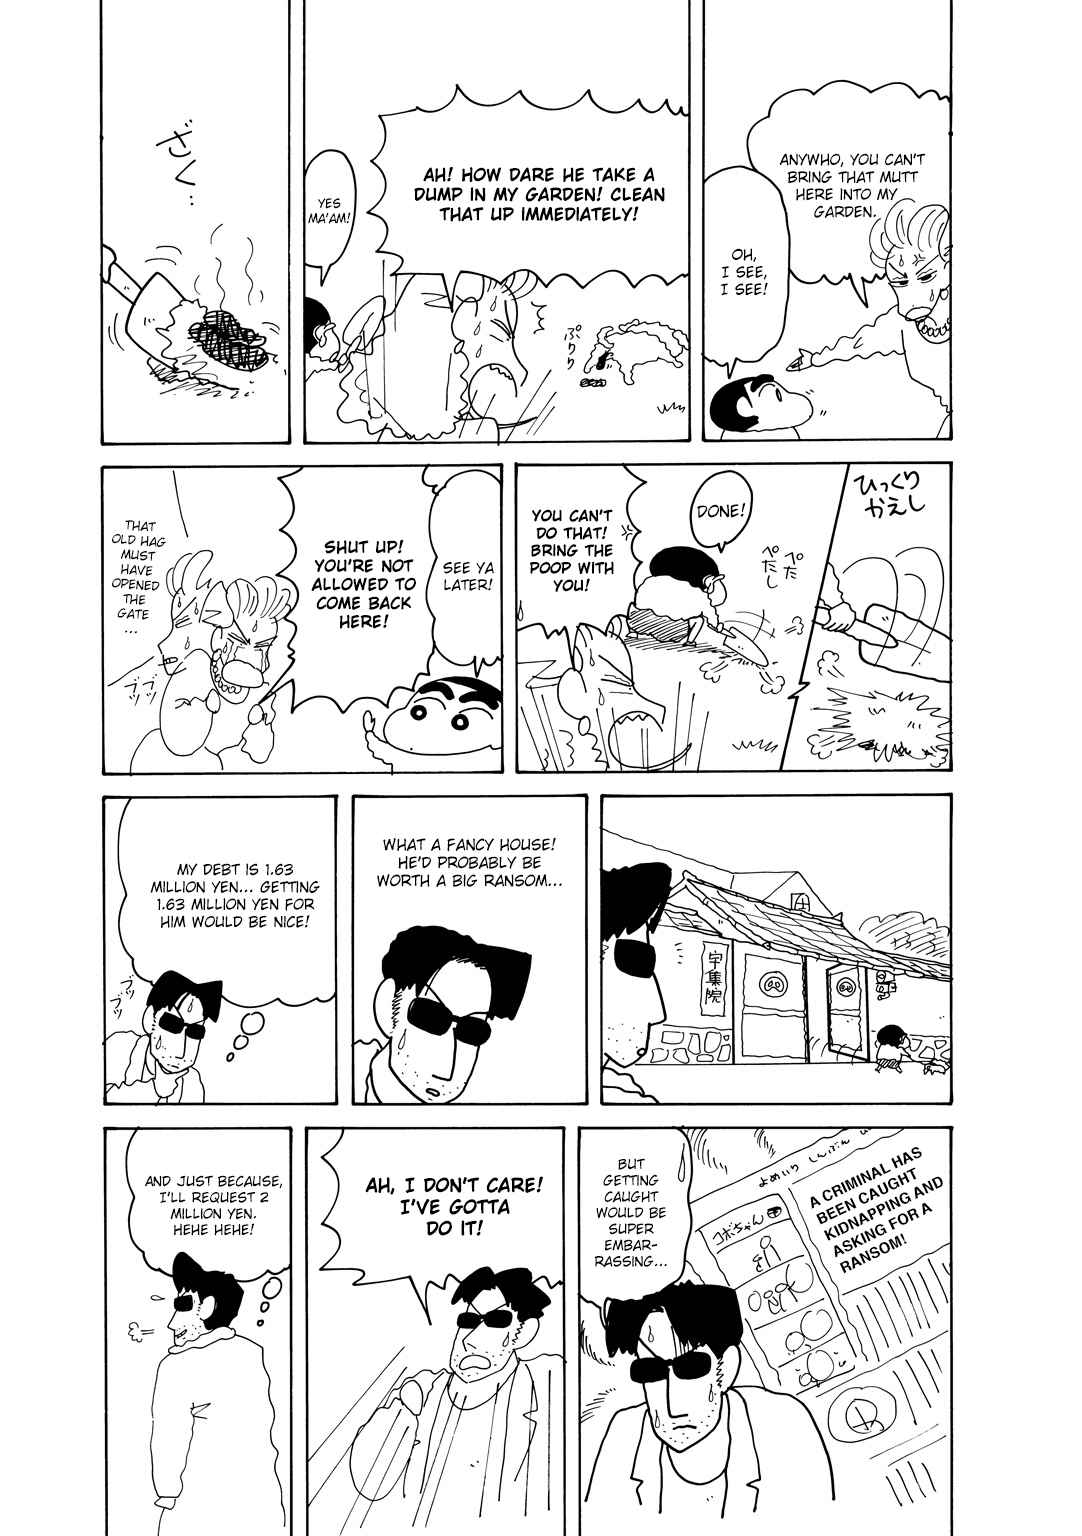 Crayon Shin chan Vol. 15 Ch. 6.3 Part 03 Dad's Cheating! A Love Letter Has Been Found